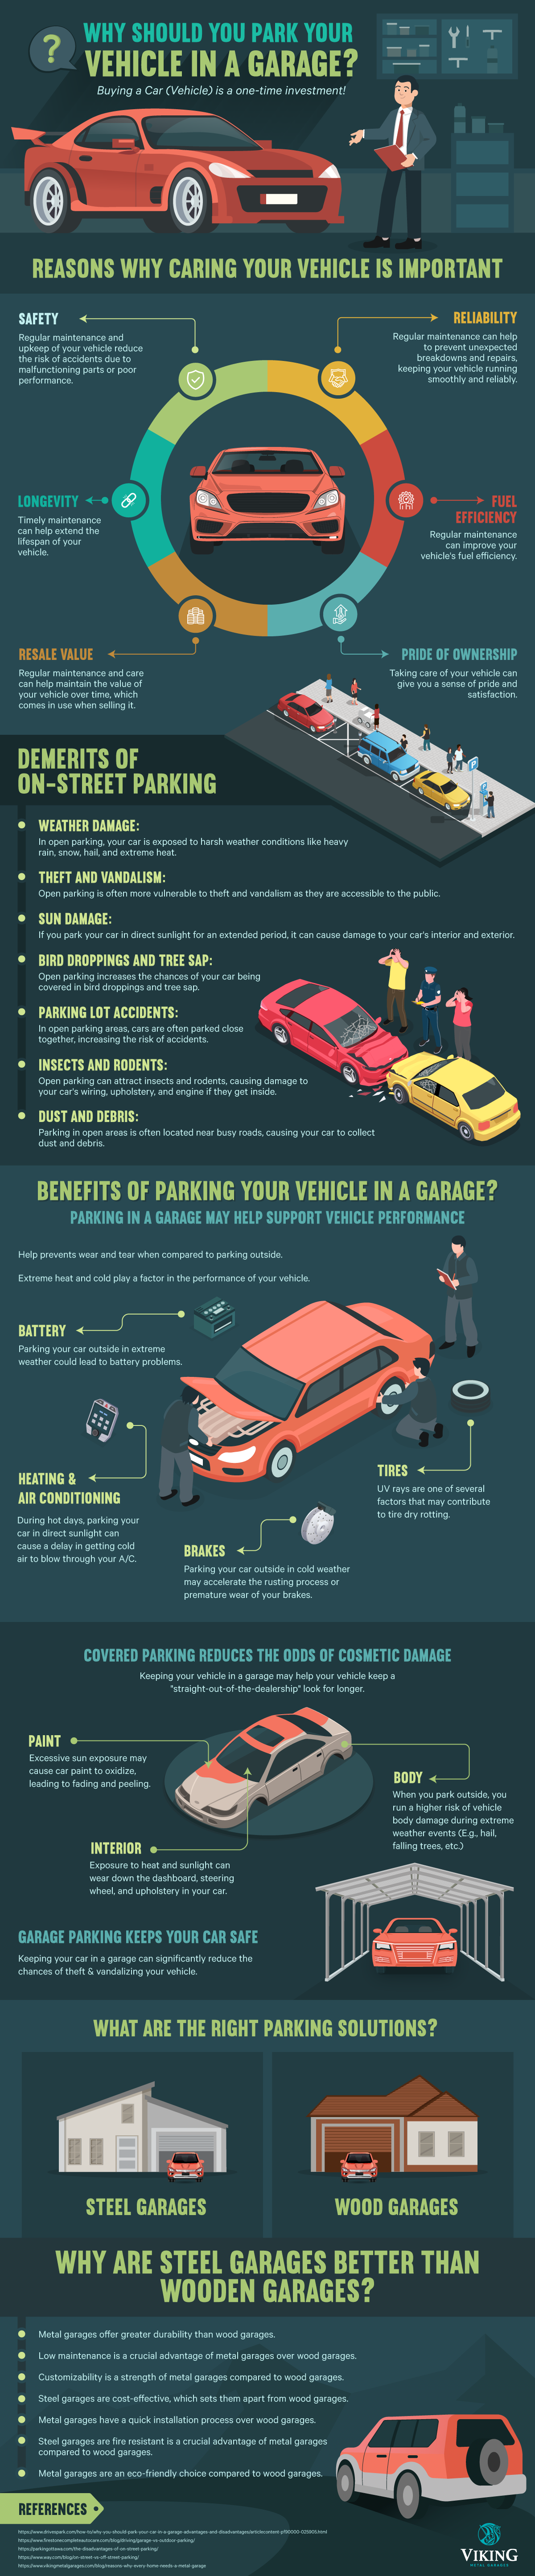 Why Should You Park Your Vehicle in A Garage?